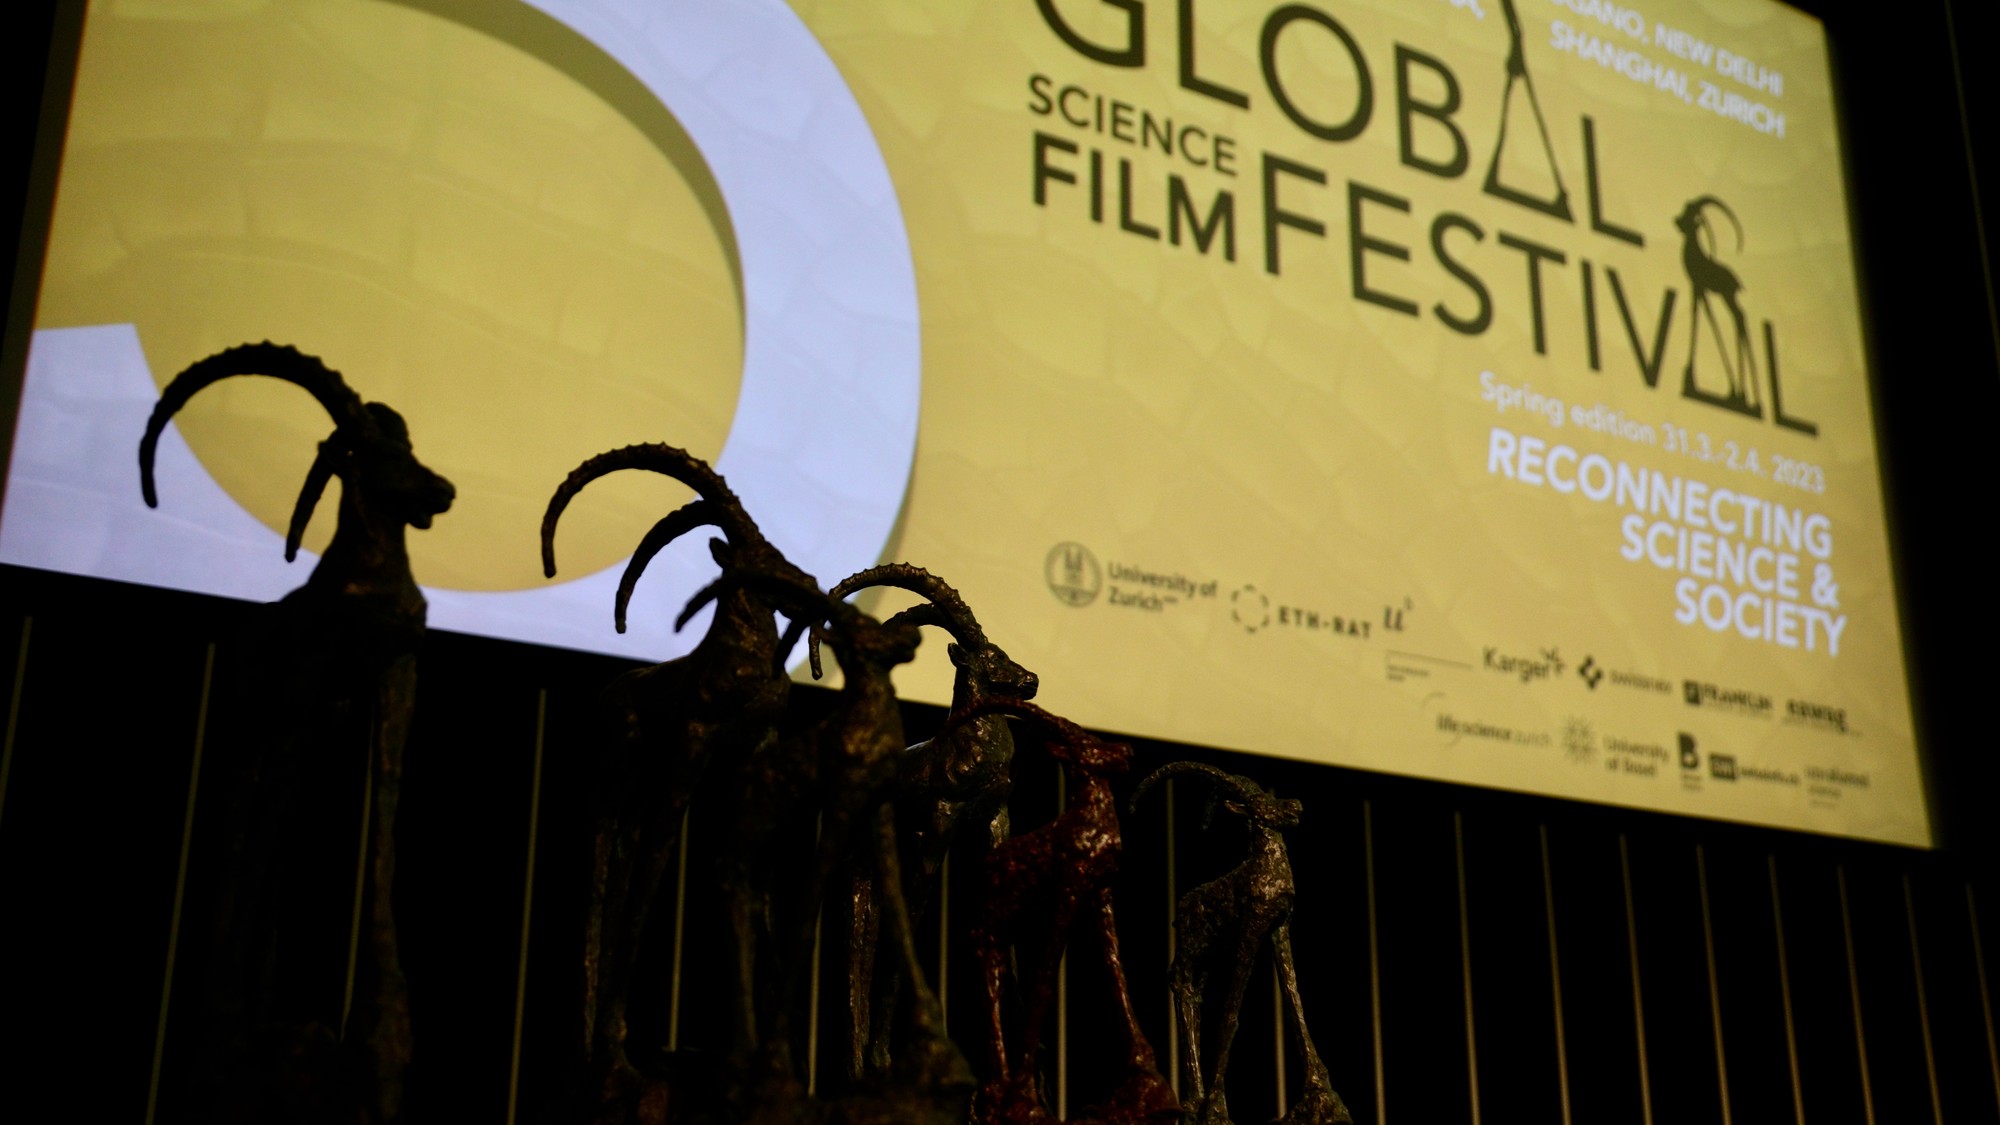 Global Science Film festival poster and Ibexes, trophies awarded to the winners © Swiss Science Film Academy